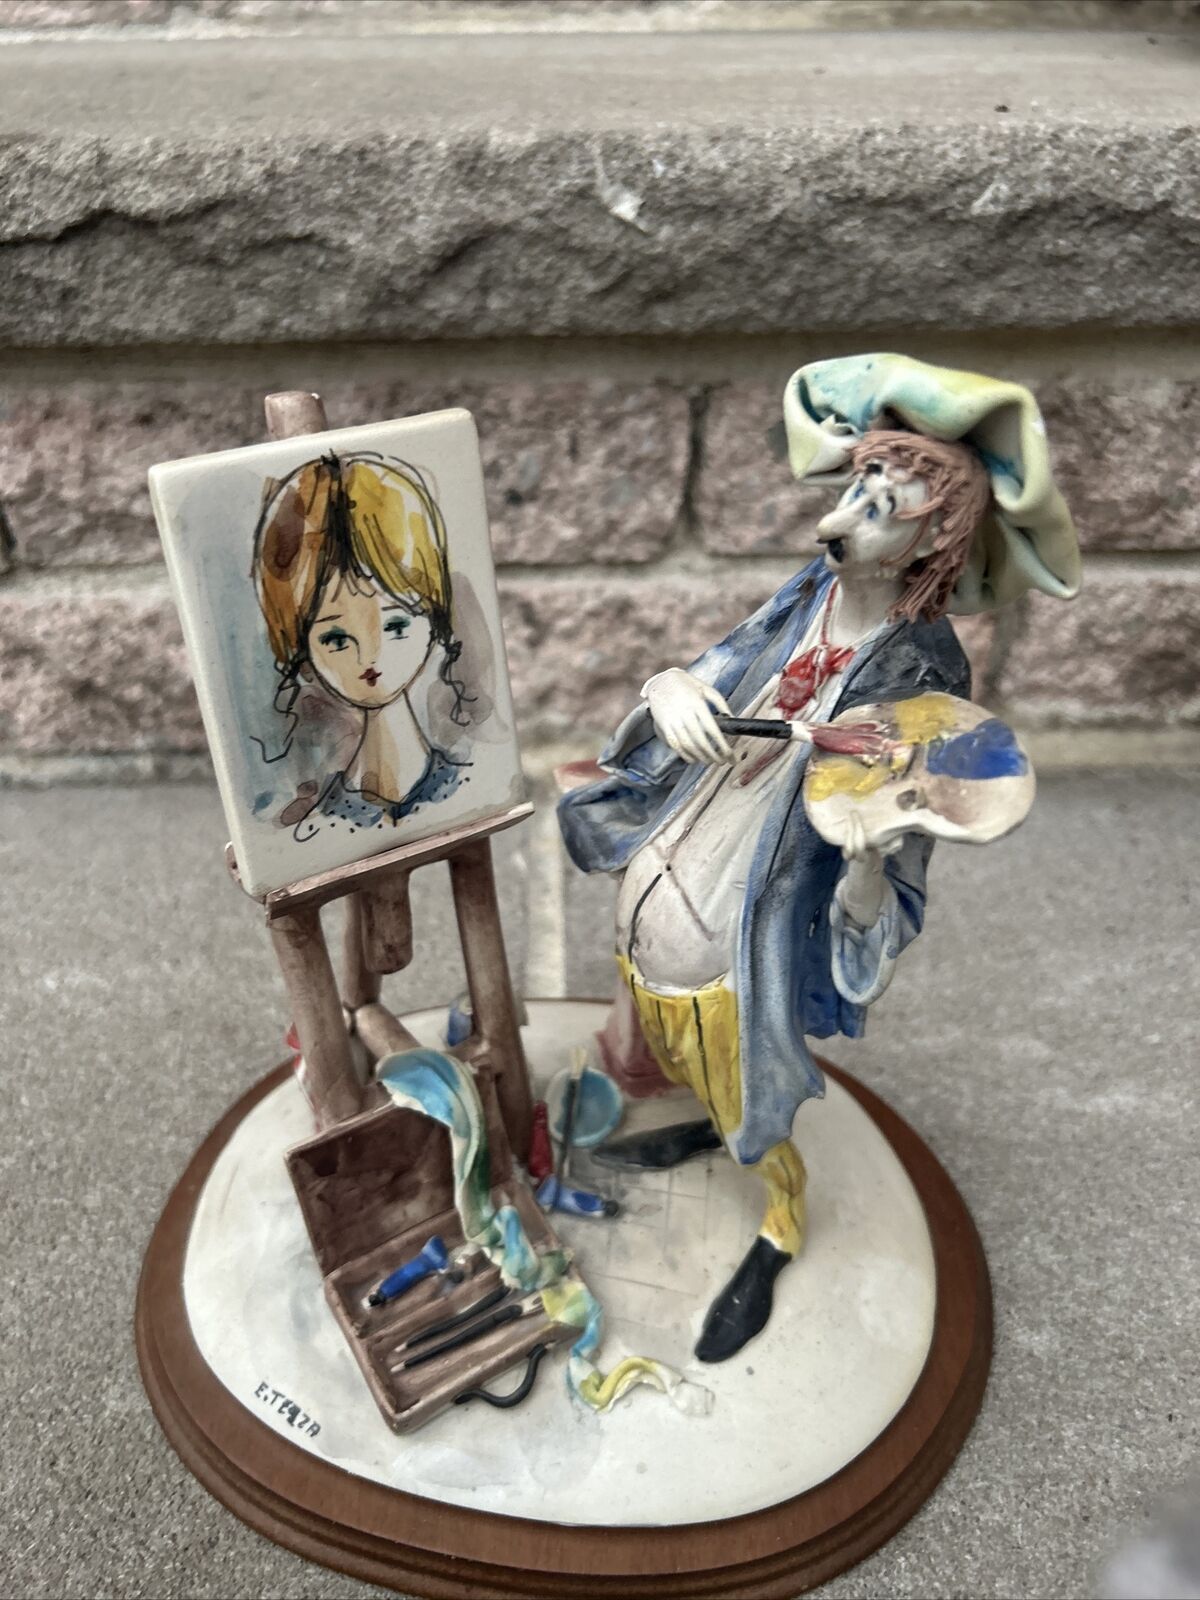 E. Tezza Porcelain Figurine Woman in Hat Painting Protrait of girl #139 Italy